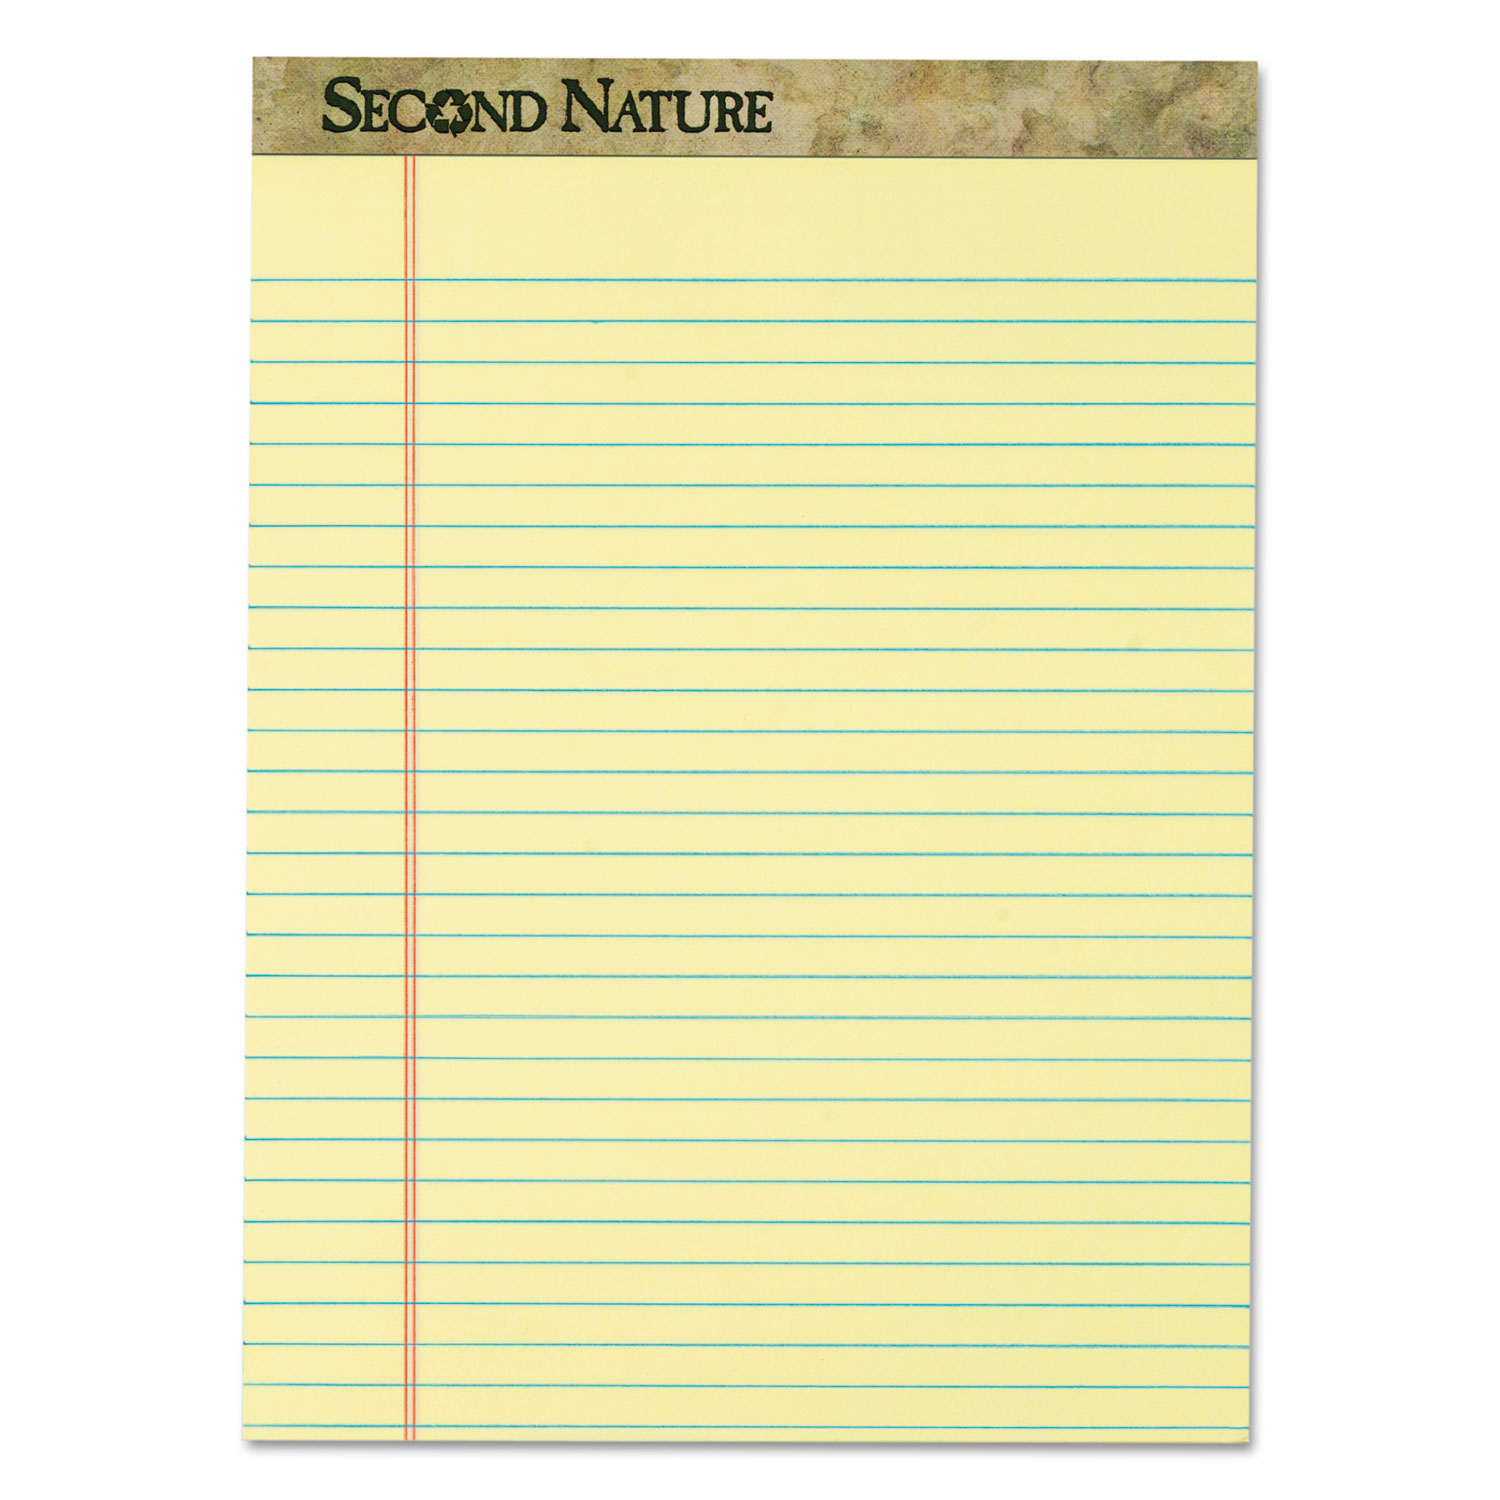 TOPS TOP74890 &#8482; Second Nature Recycled Pads, 8 1/2 x 11 3/4, Canary, 50 Sheets, Dozen